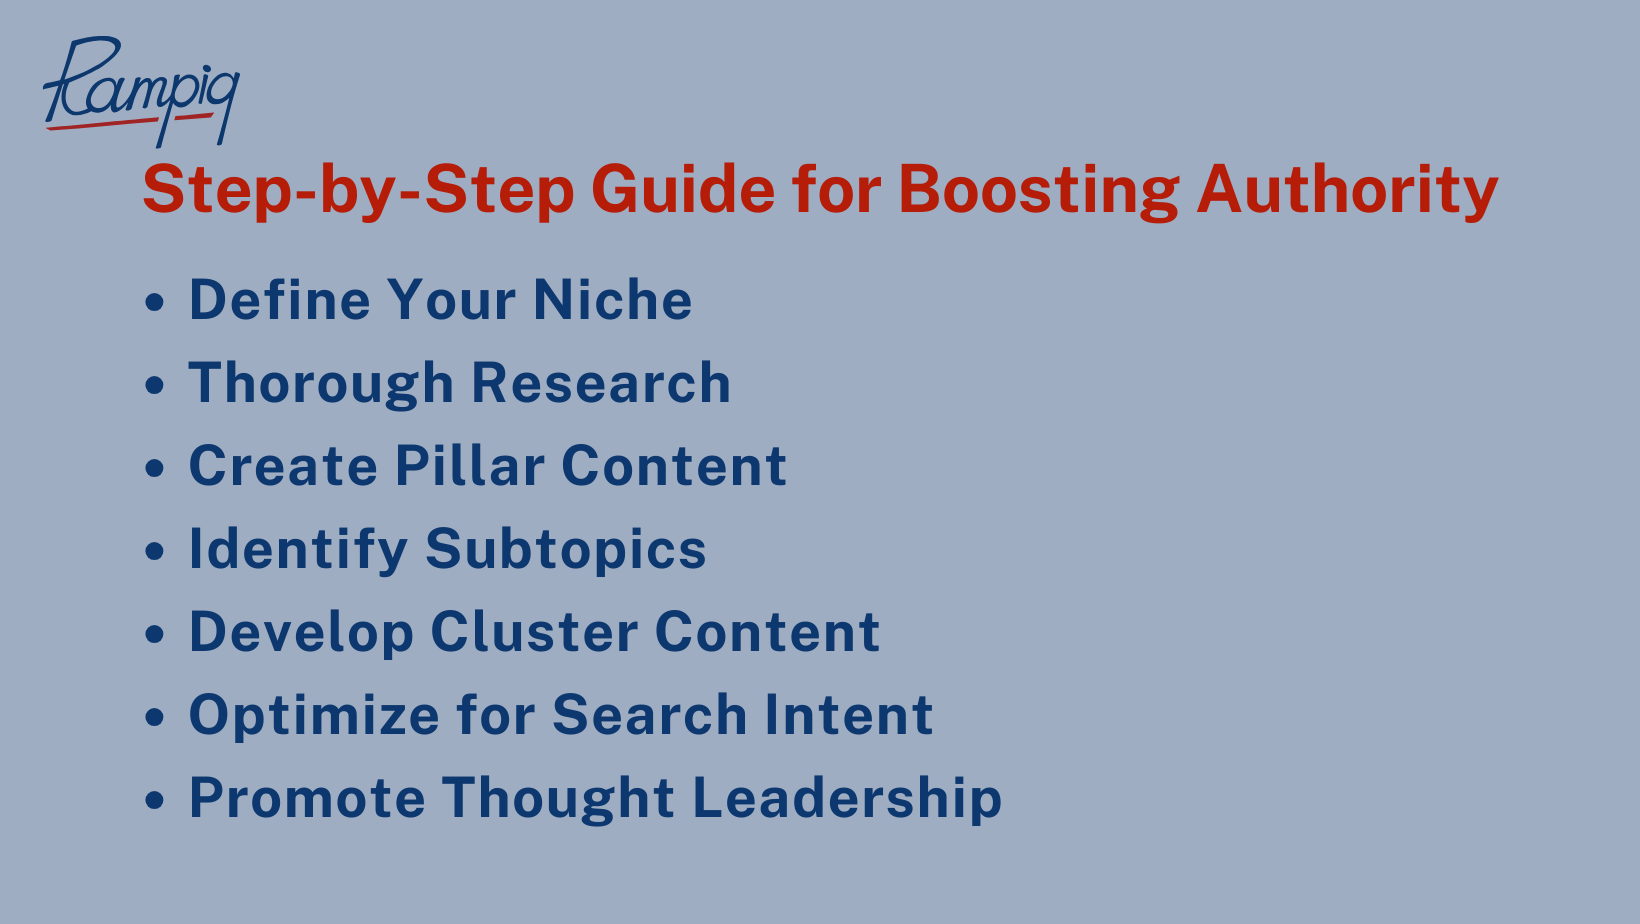 Step-by-Step Guide for Boosting Authority